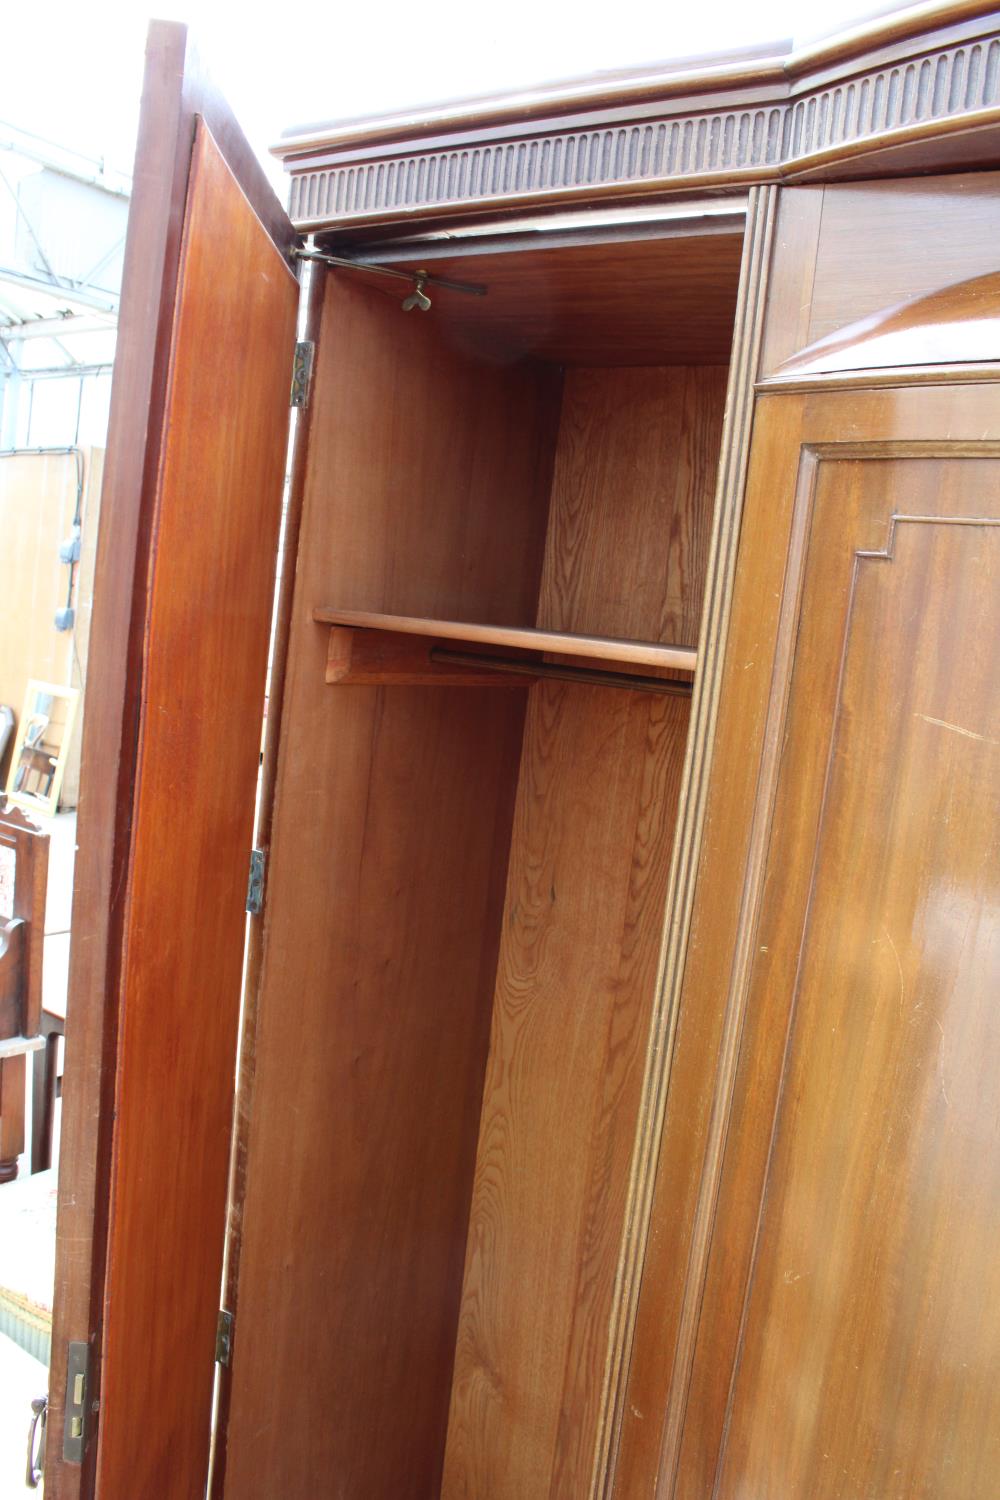 AN EDWARDIAN MAHOGANY PARTIALLY BOW FRONTED MIRROR-DOOR WARDROBE ON BRACKET FEET, 61" WIDE - Image 4 of 5